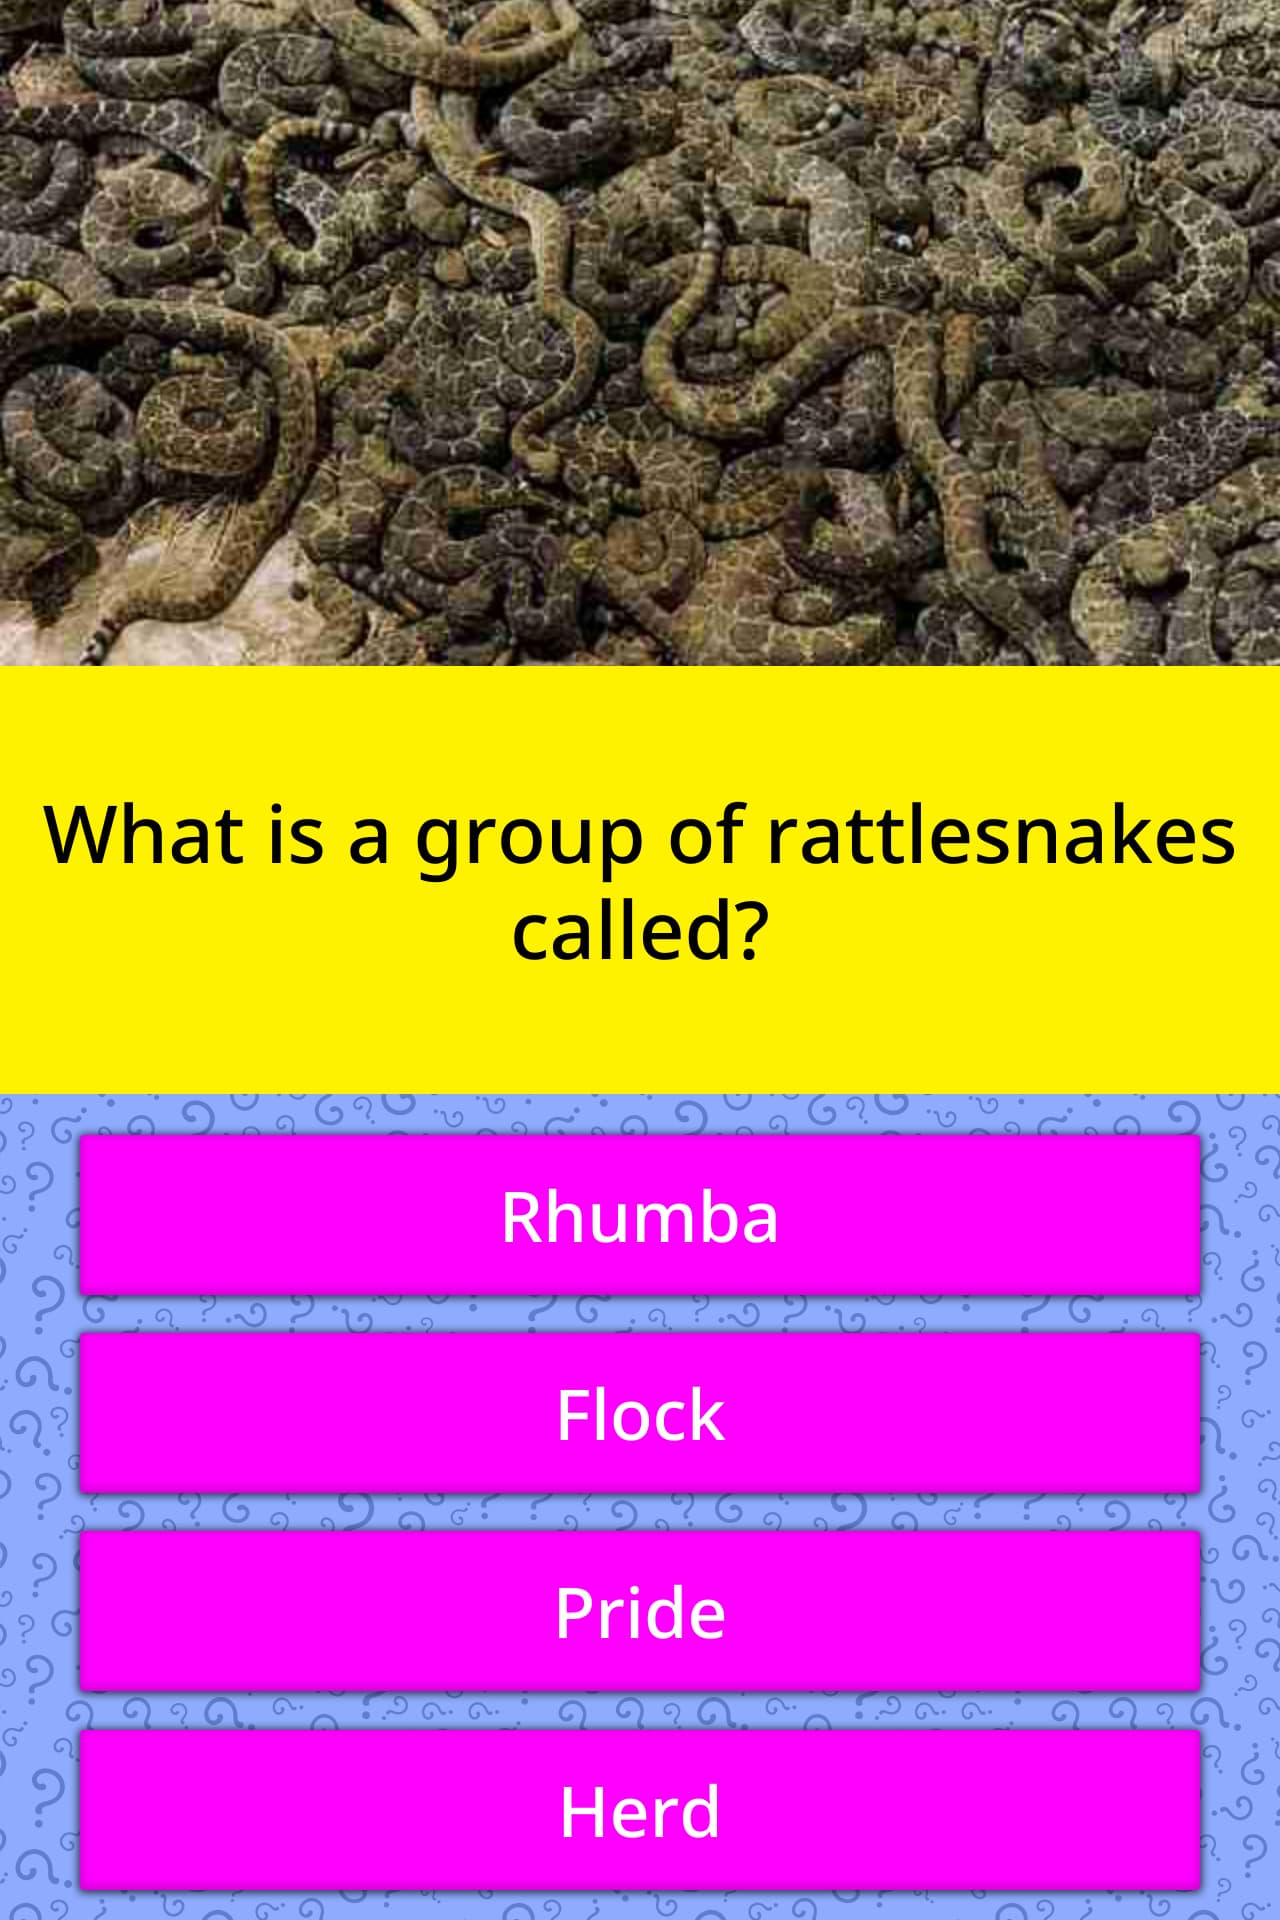 What do you call a group of rattlesnakes?